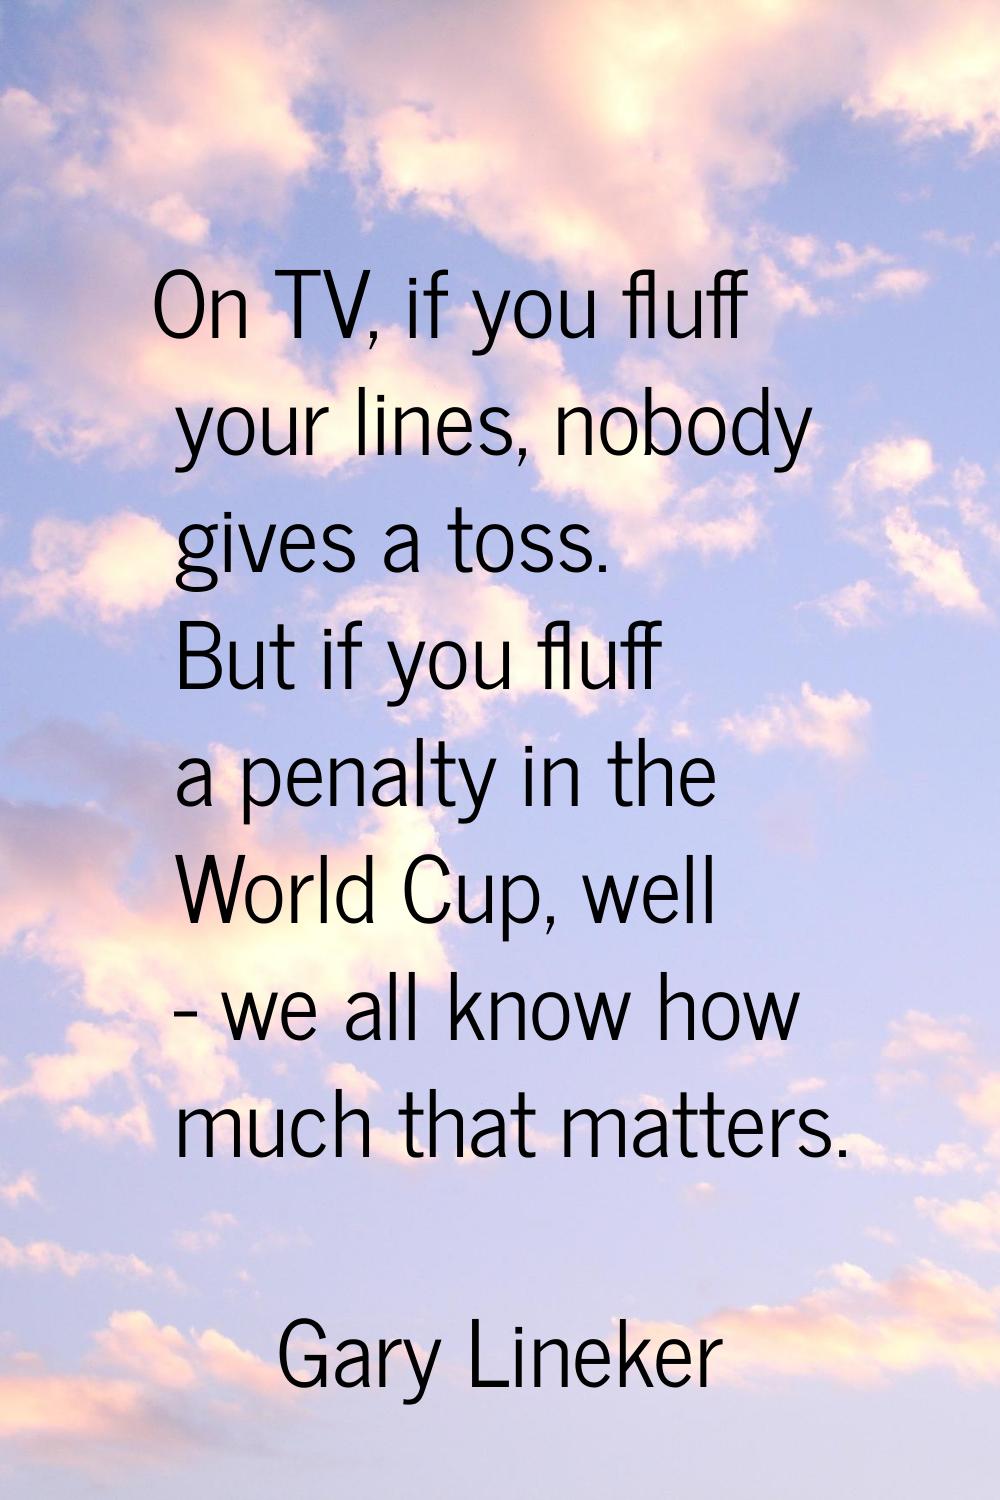 On TV, if you fluff your lines, nobody gives a toss. But if you fluff a penalty in the World Cup, w